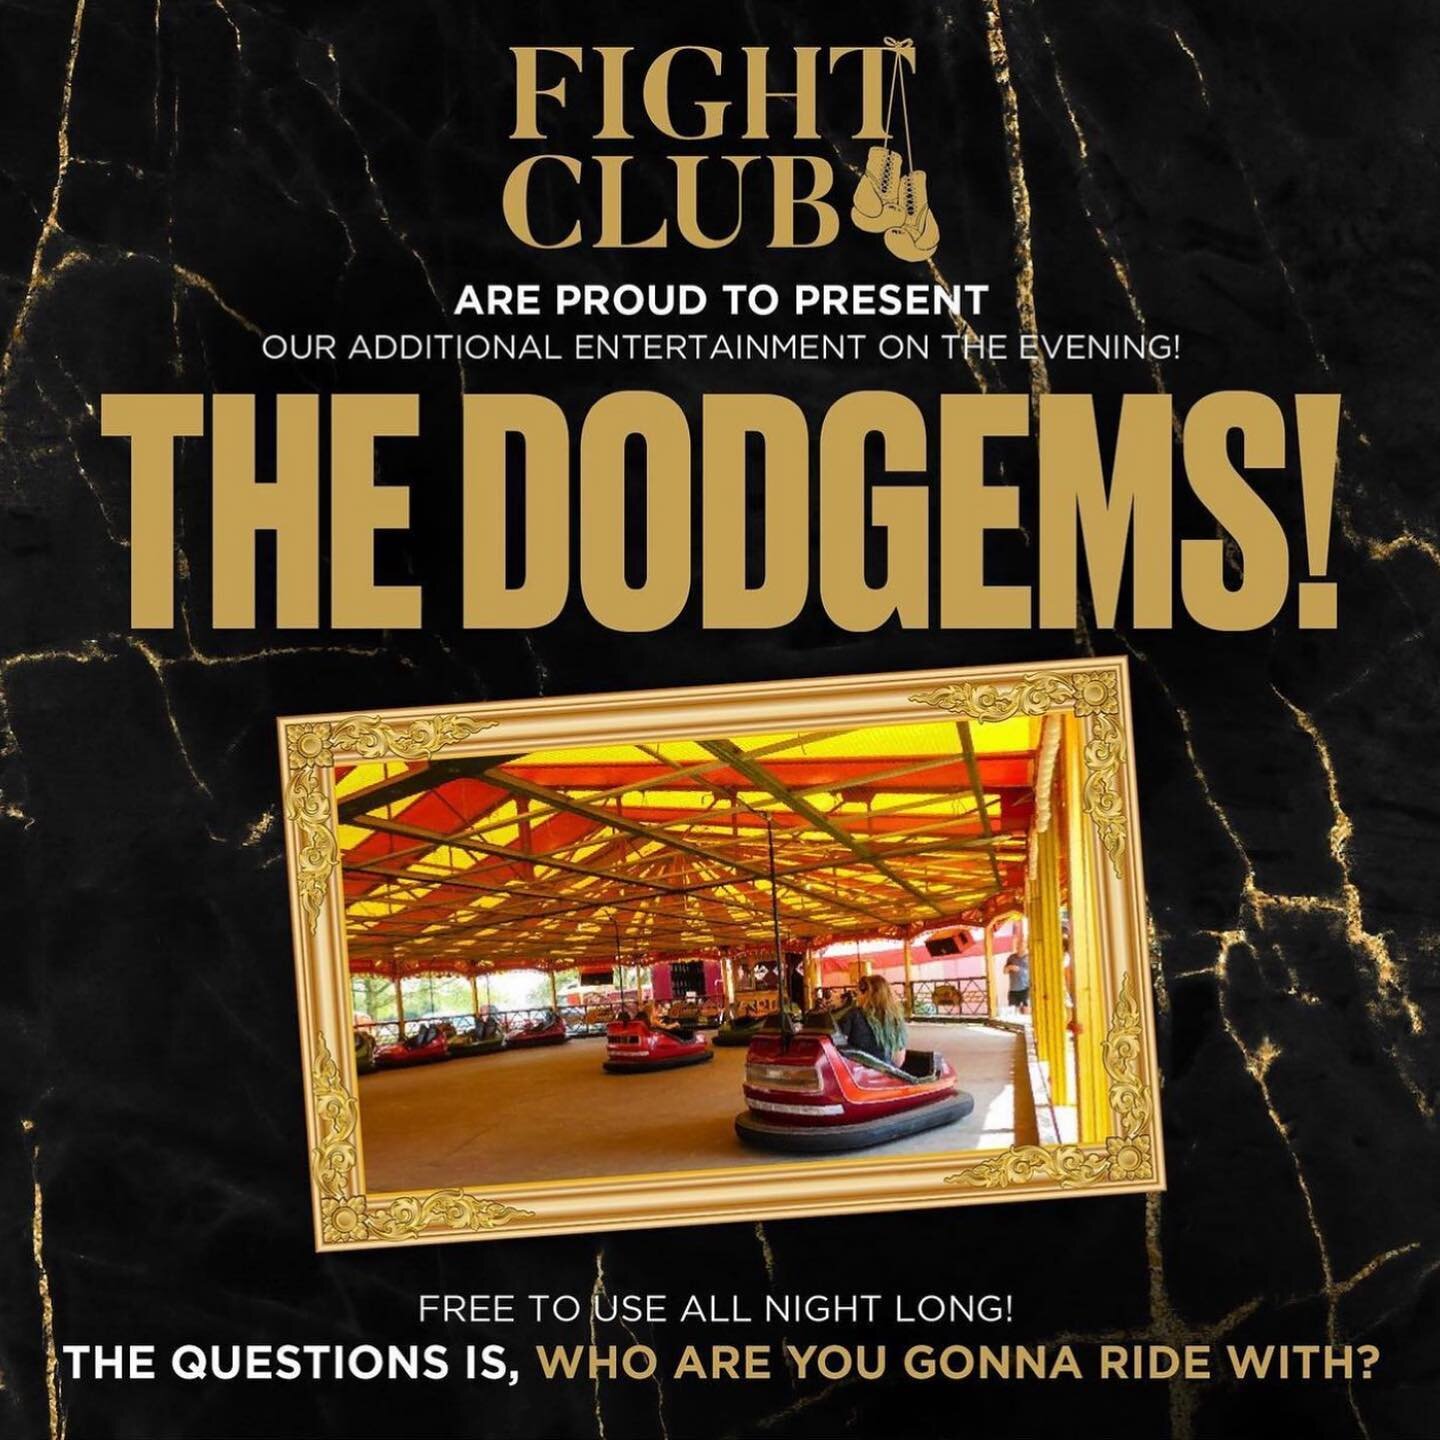 BACK BY POPULAR DEMAND&hellip; THE DODGEMS!! 🏎🤩 Strap in tight and get your handbrake turns ready as we figured two of our biggest events to date deserve our biggest fairground attraction of them all&hellip; yep you guessed it it&rsquo;s the RETURN